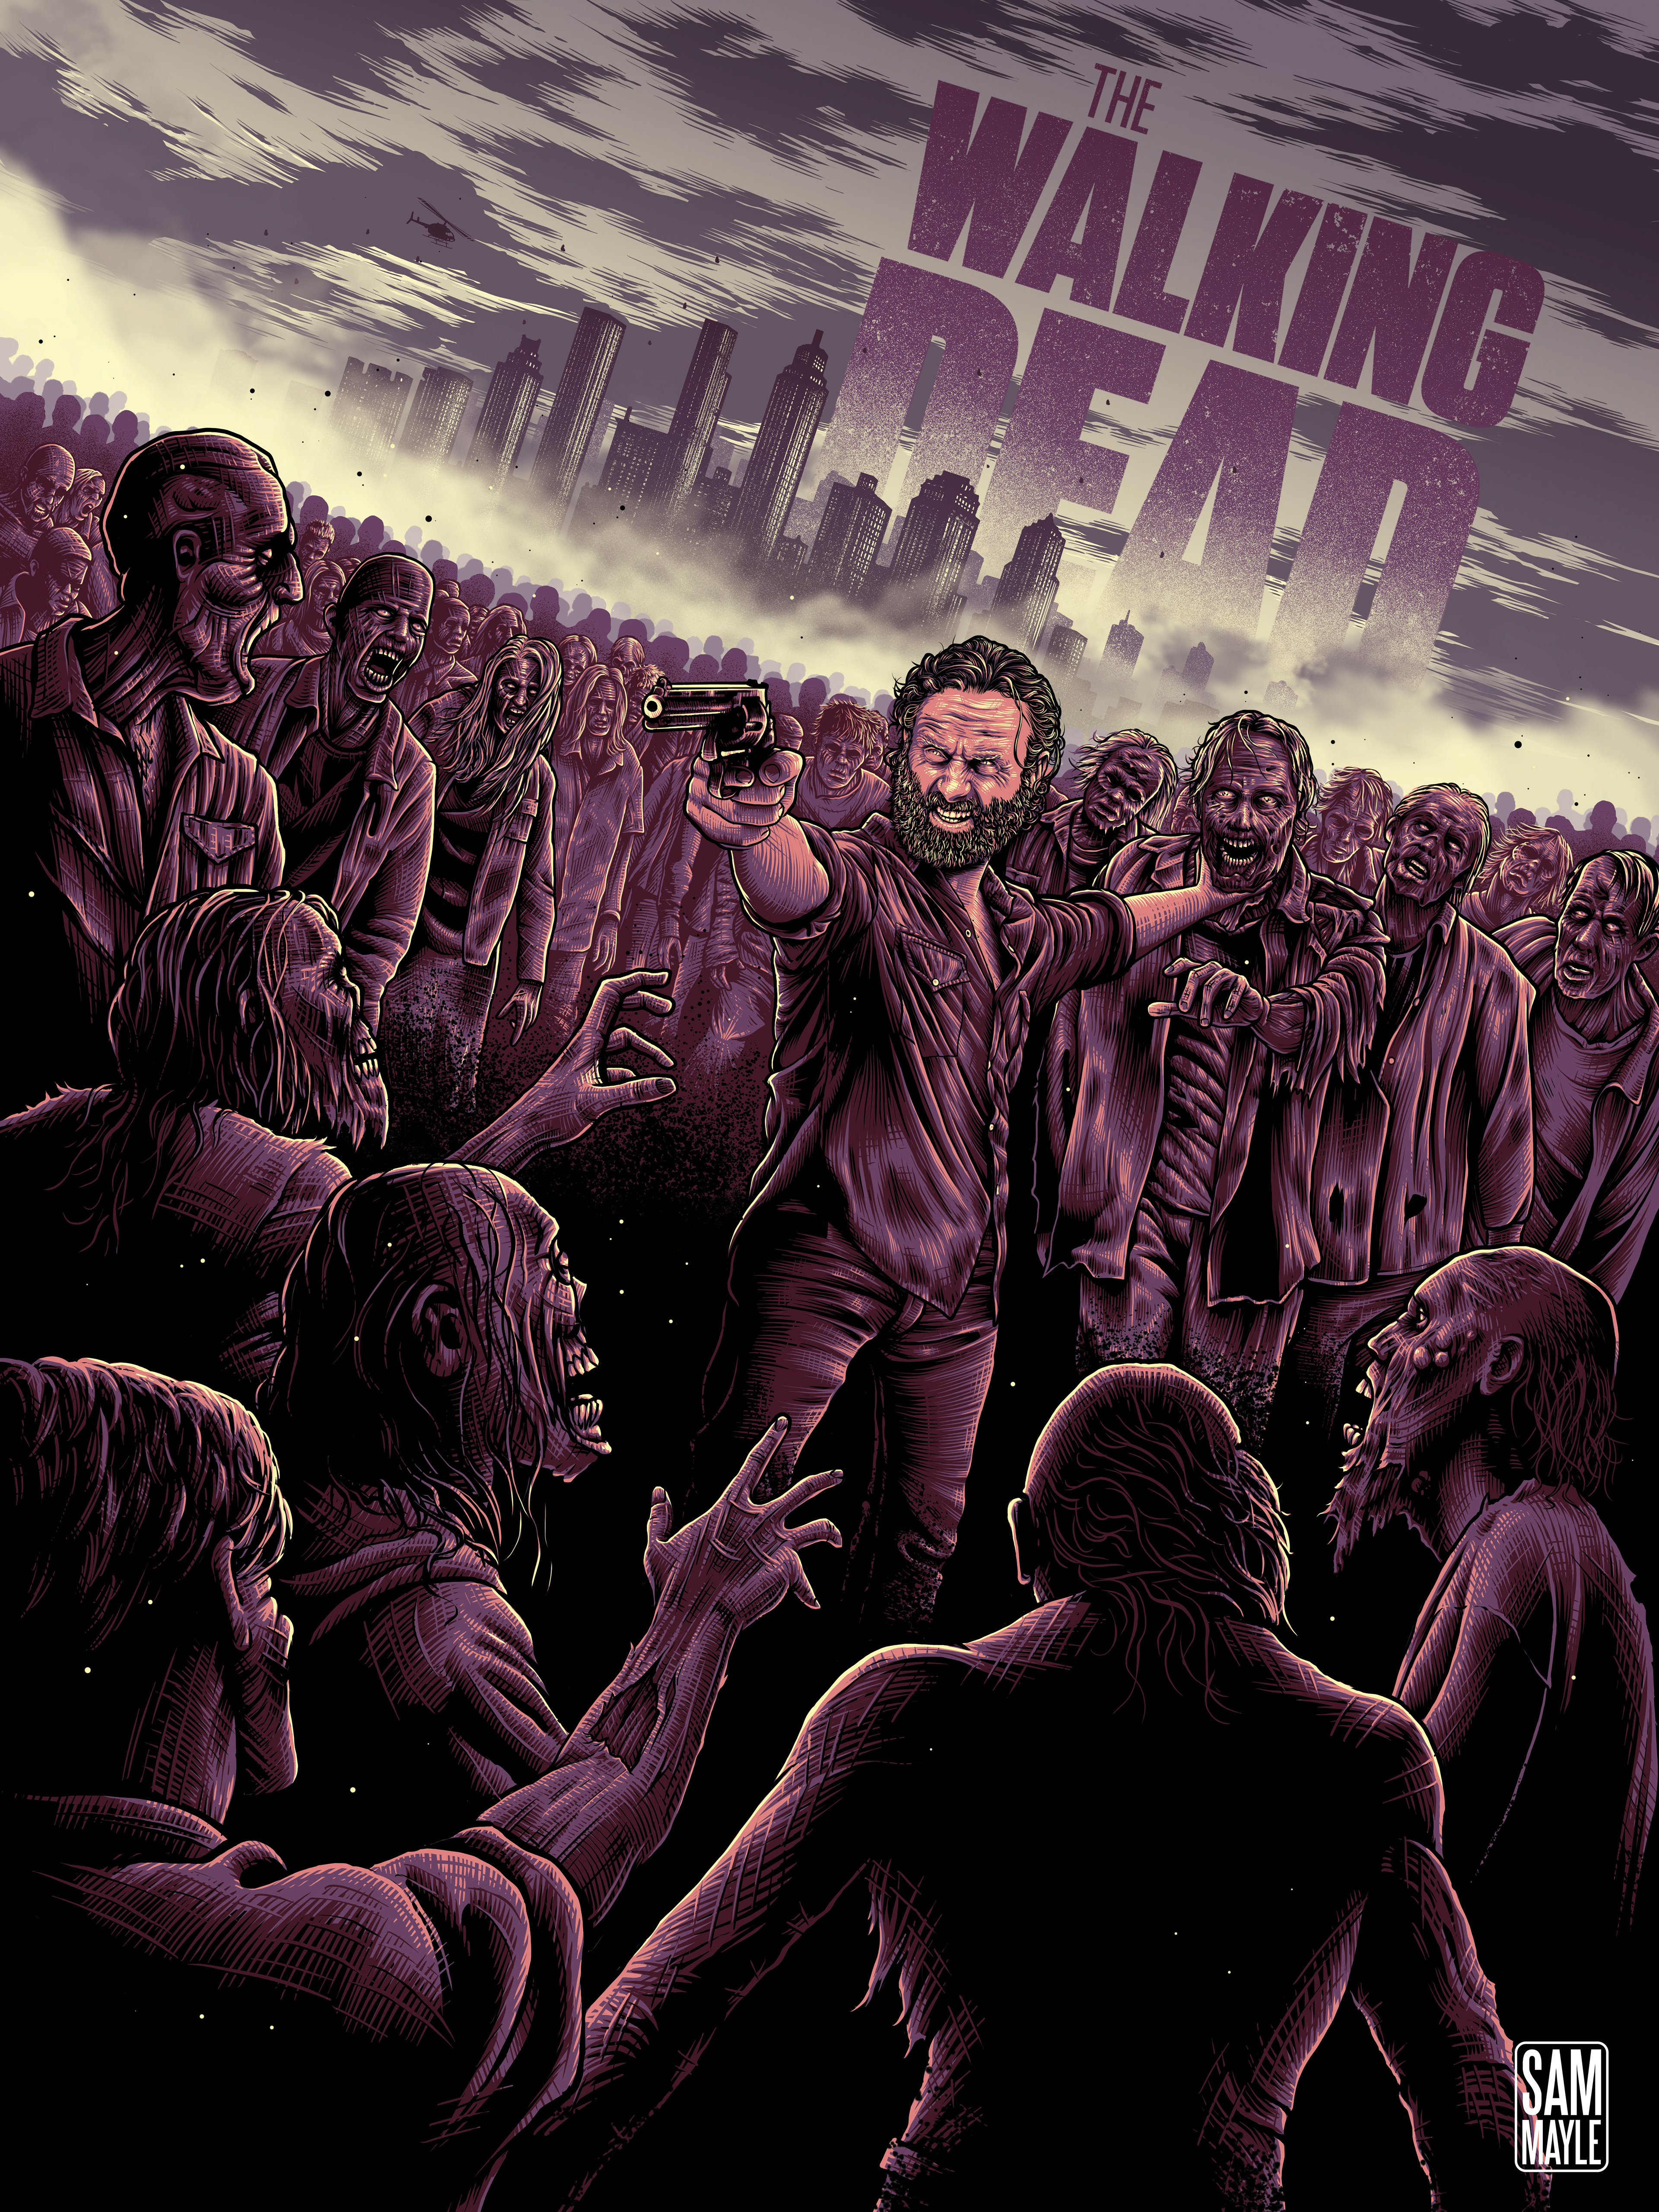 Sam Mayle - The Walking Dead - Poster